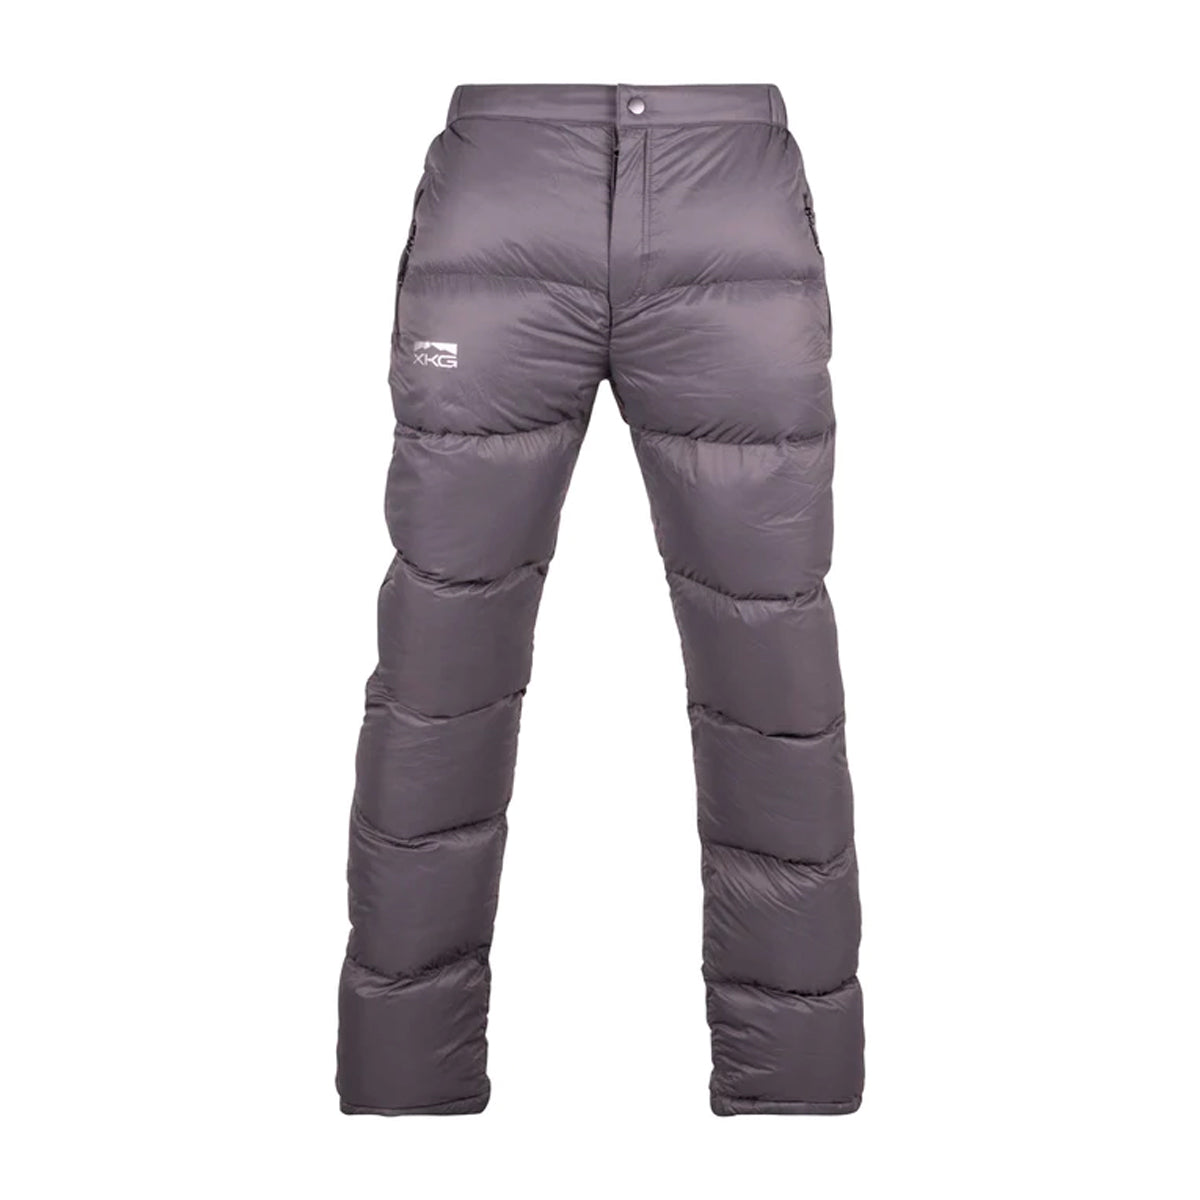 King's XKG Down Transition Pant in Charcoal by GOHUNT | King's - GOHUNT Shop